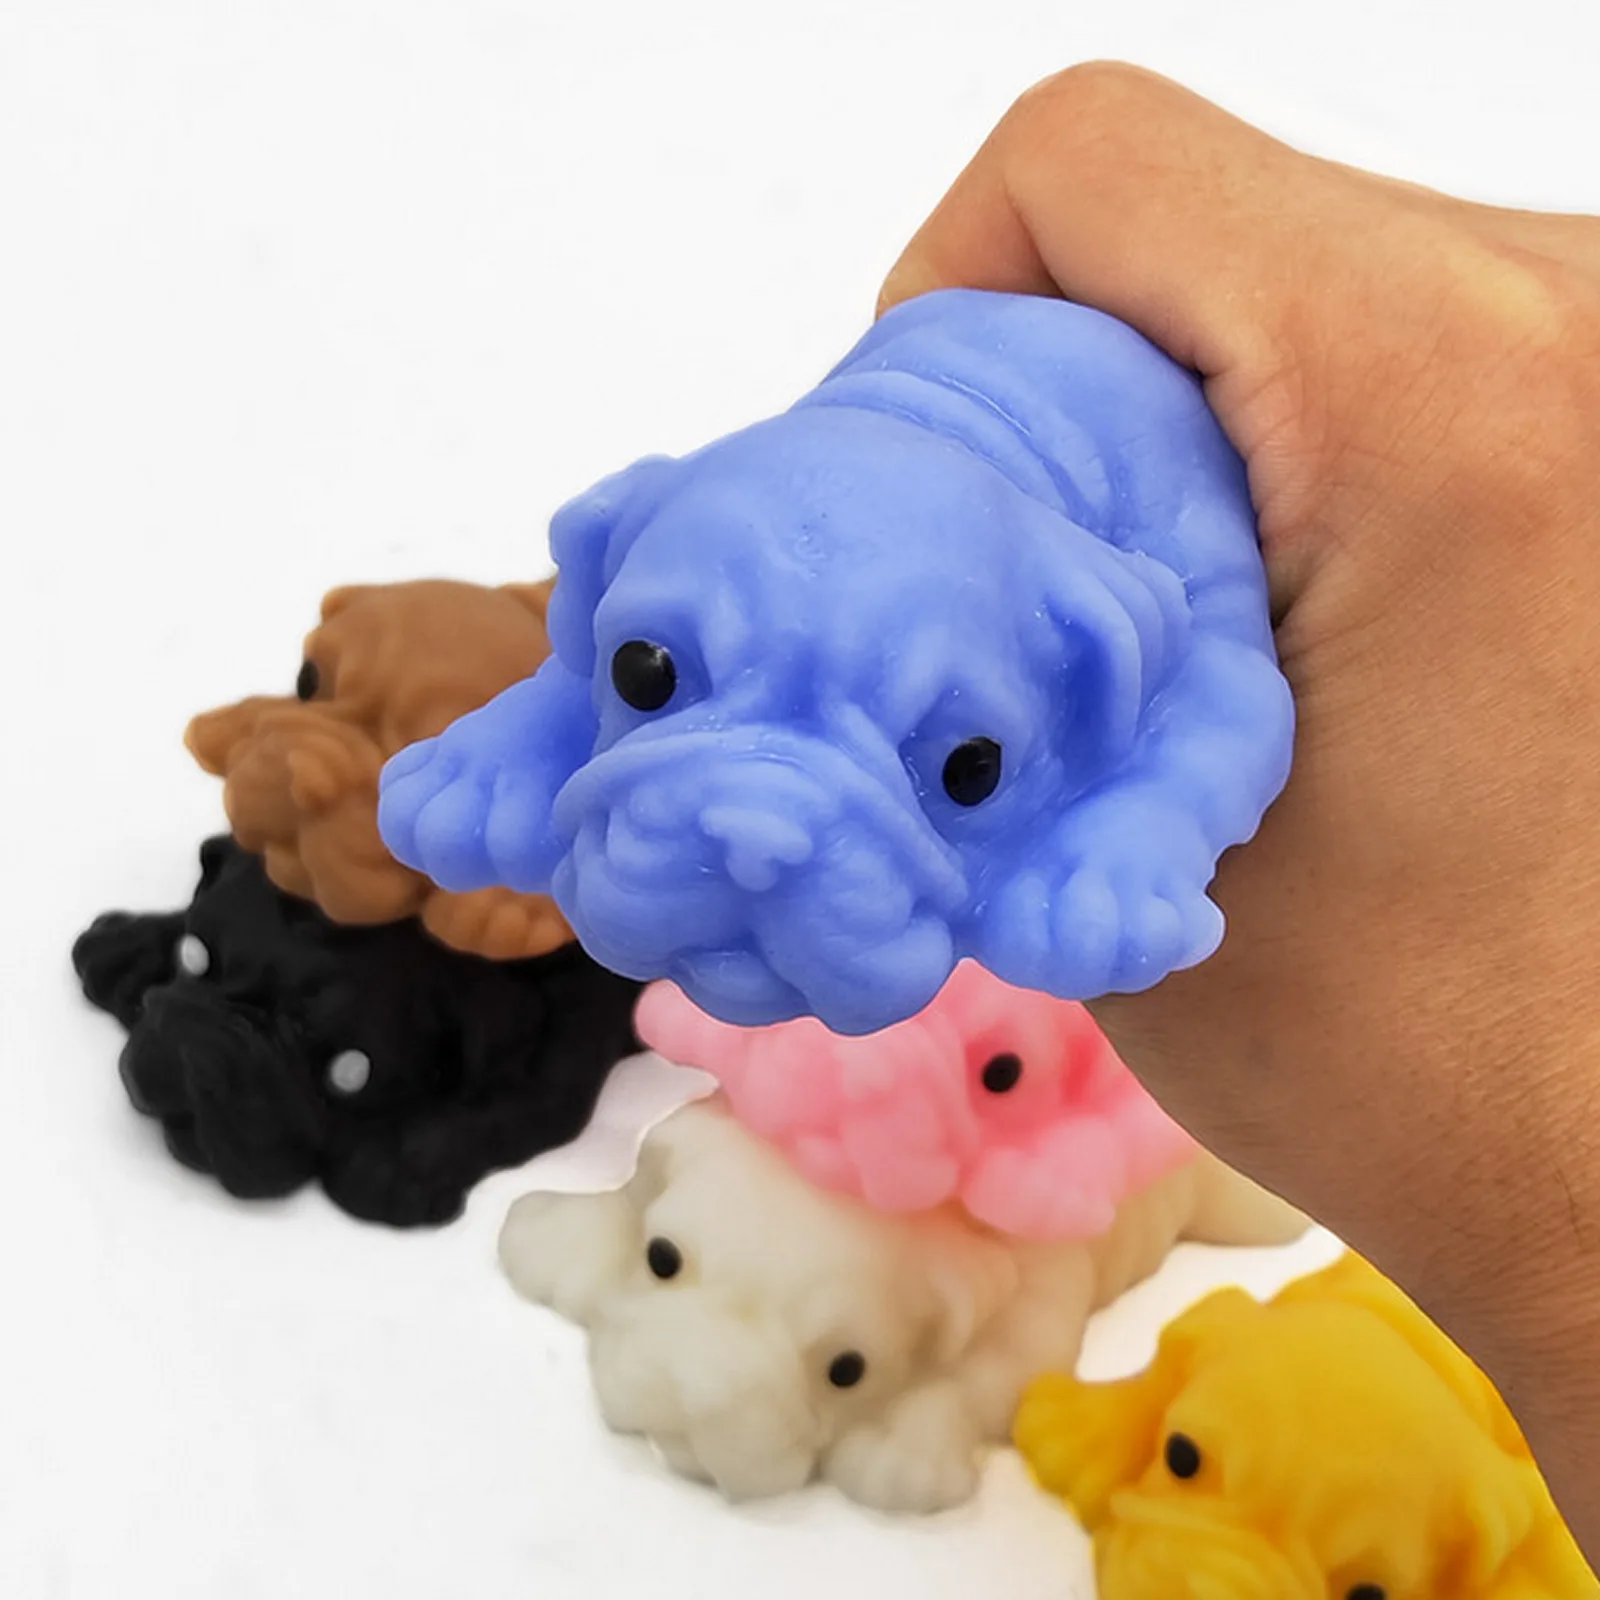 

Cute Squeeze Pug Dog Toy Soft Anxiety Relief Stress Decompression Sensory Squishies Toy for Adults Kids Birthday Christmas Gift